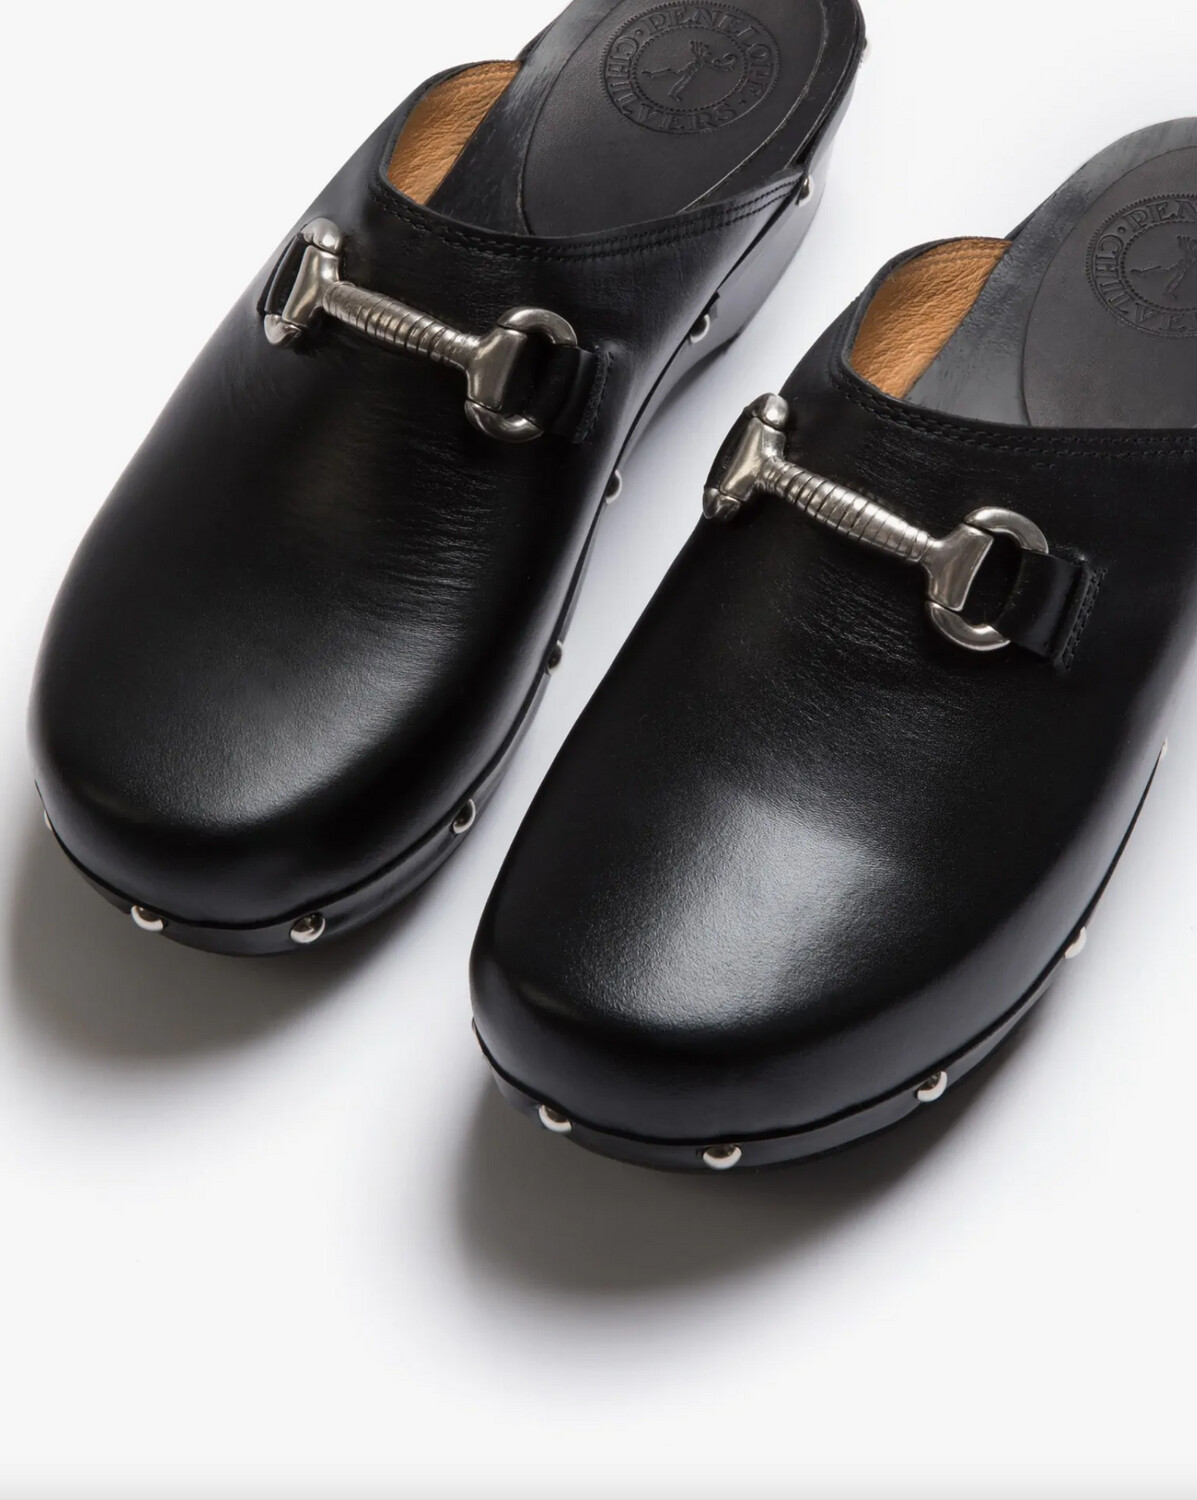 Penelope Chilvers Low Horsebit Leather Clog in Black